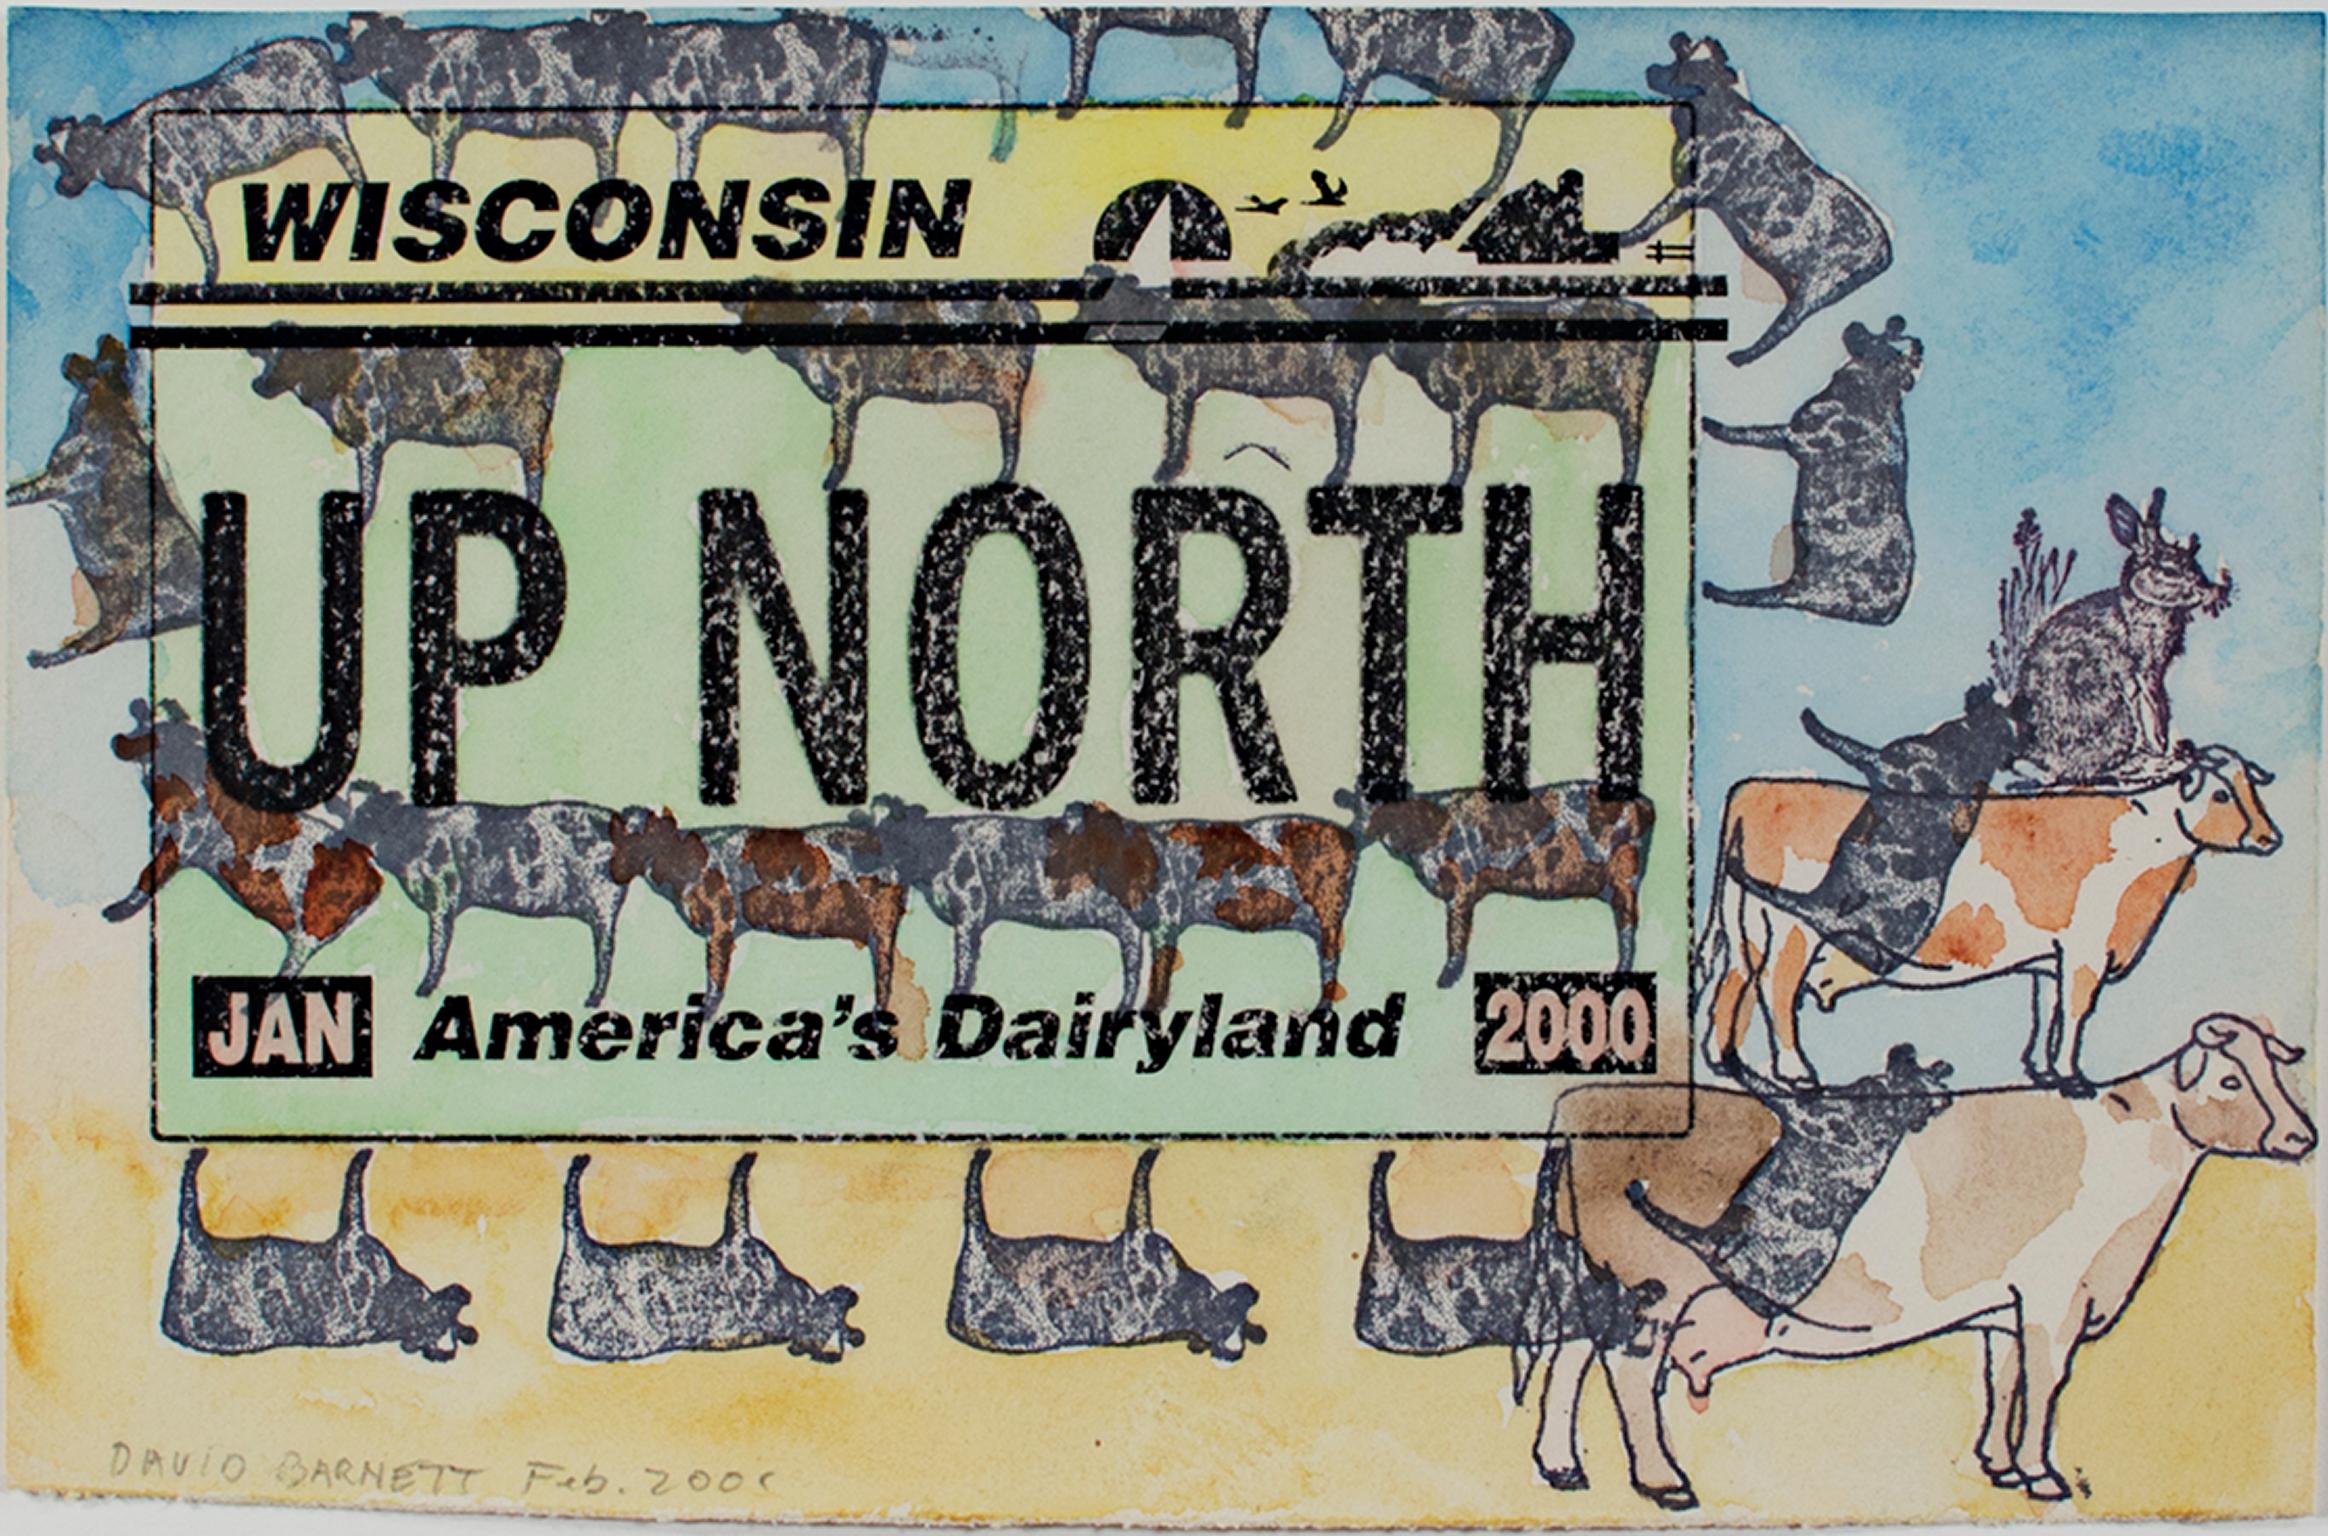 "Up North Wisconsin Series: Surround Cows" is an original watercolor and ink piece by David Barnett, signed in the lower left. The piece features a Wisconsin license plate surrounded by small cows that march along its edges. On the right, two larger